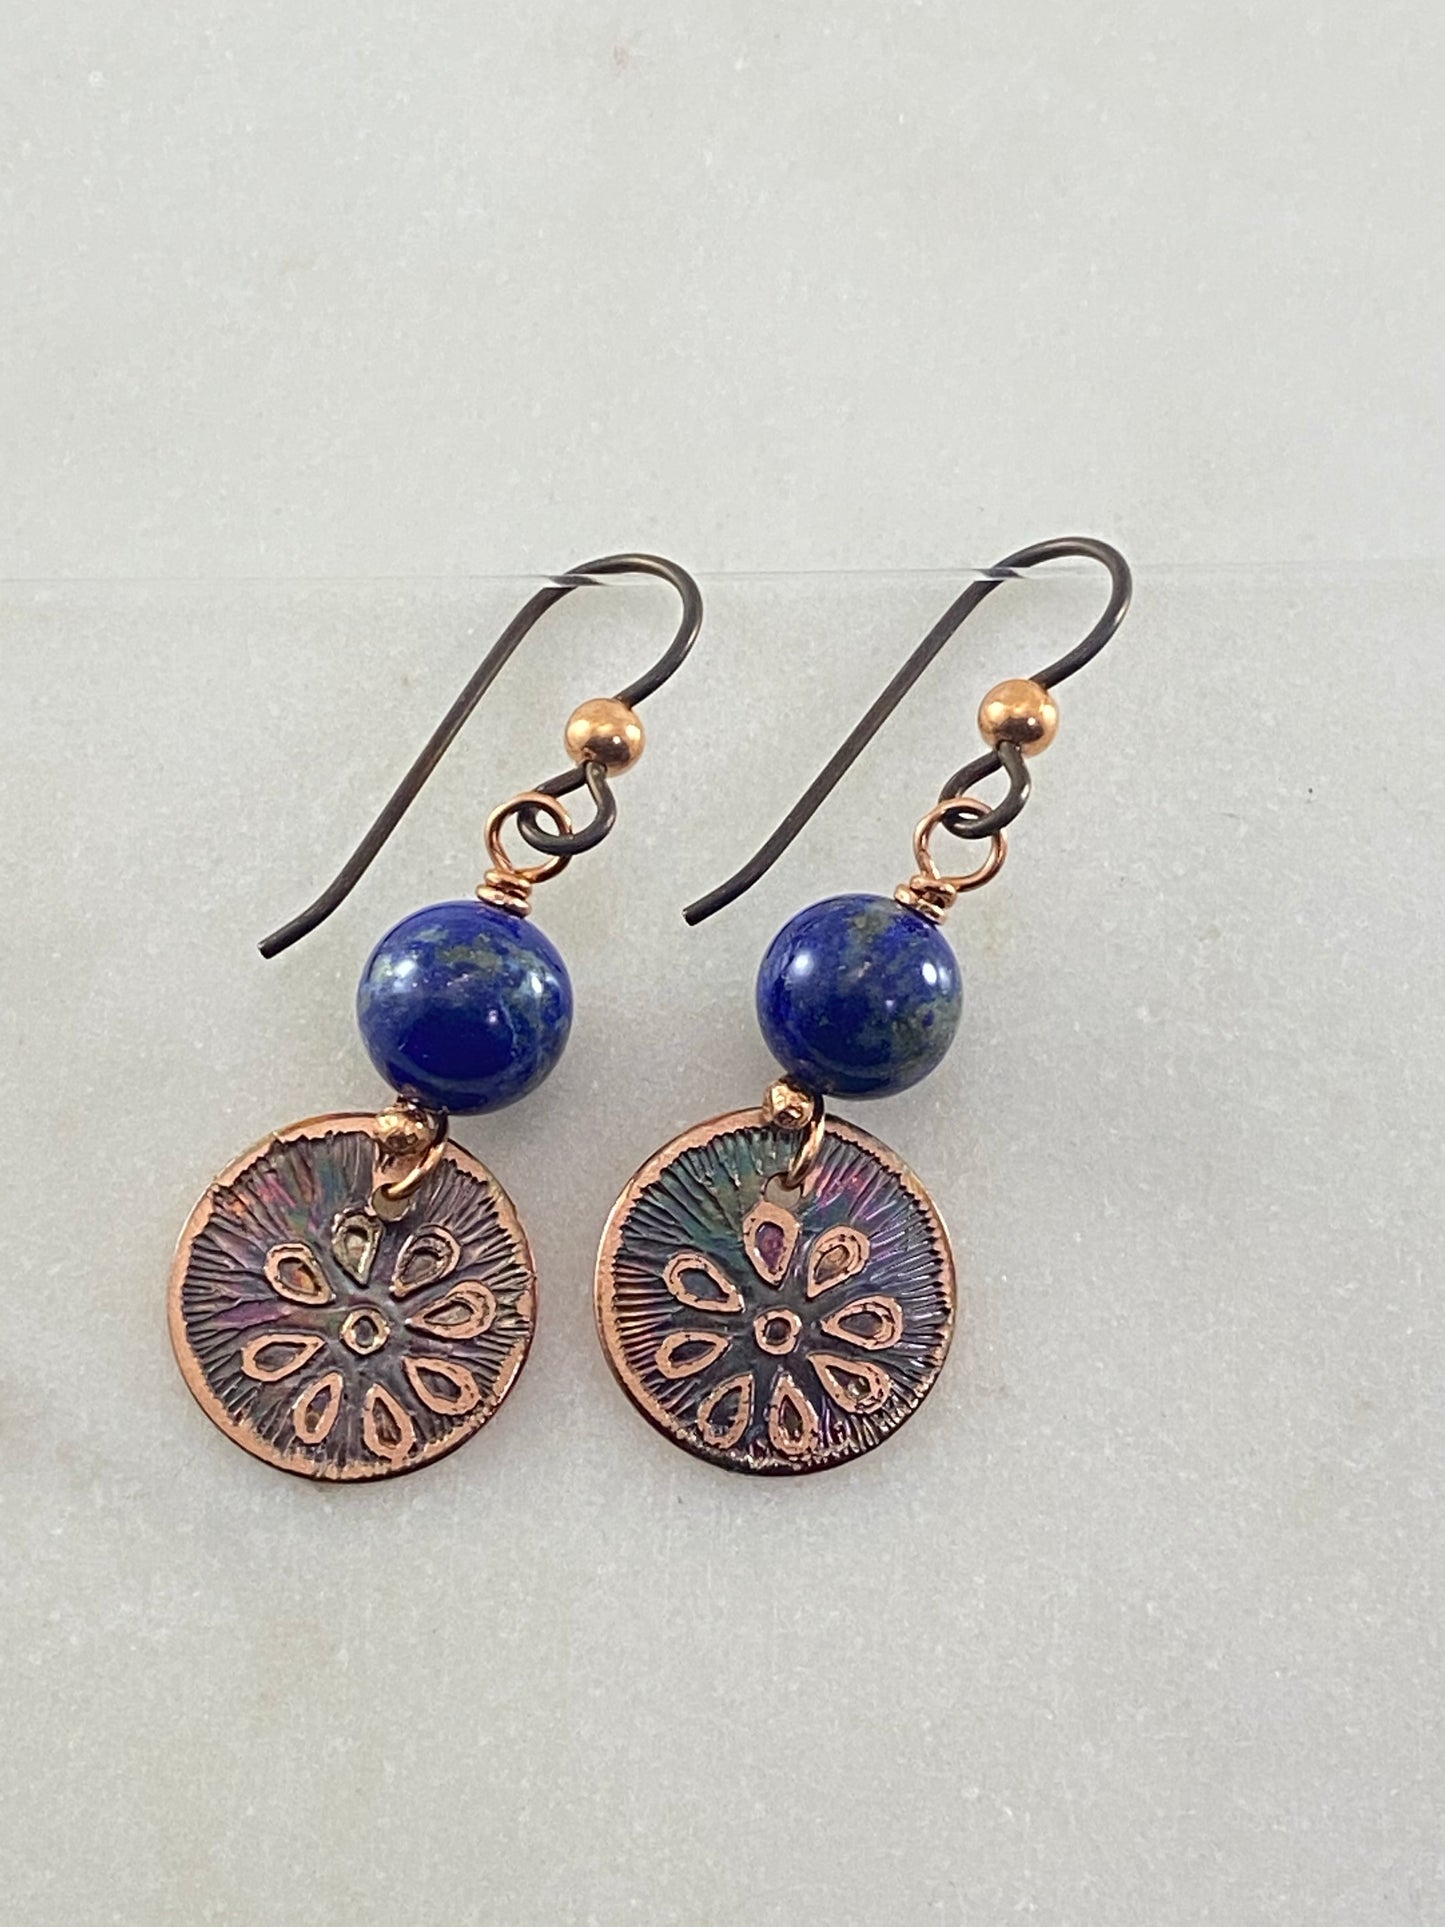 Acid etched copper earrings with lapis gemstones